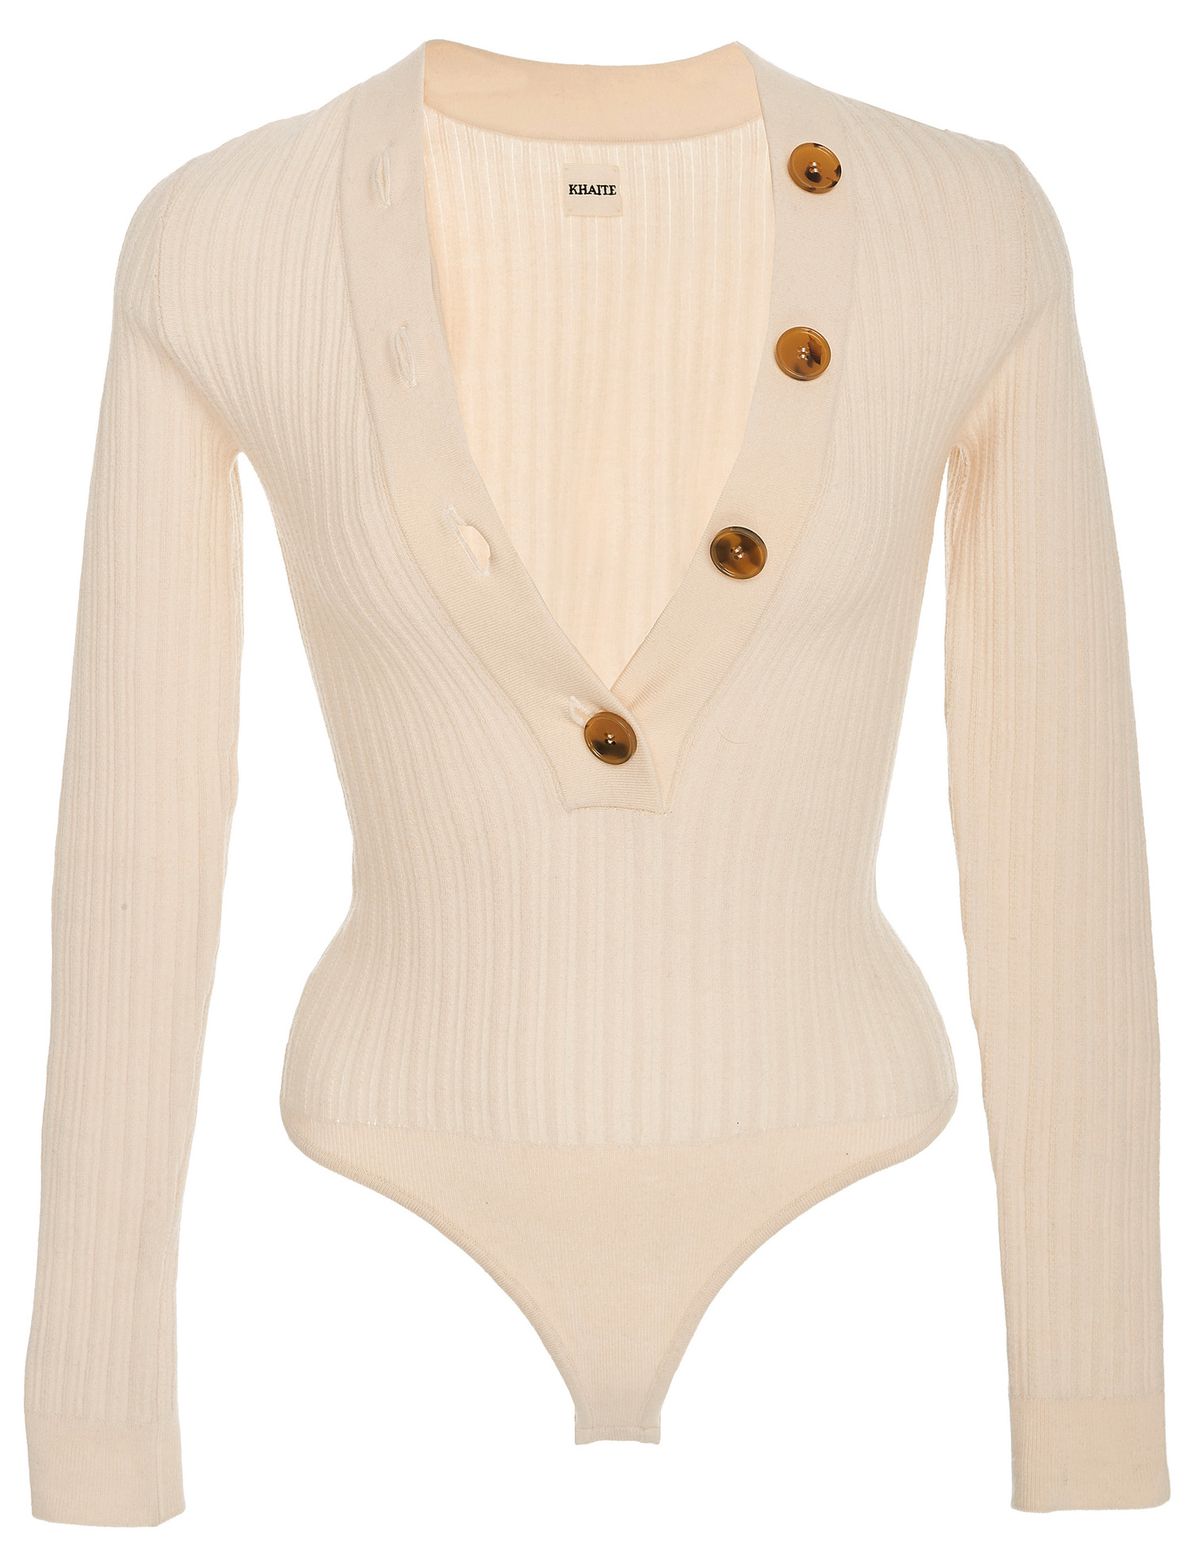 The Button-Detailed Bodysuit